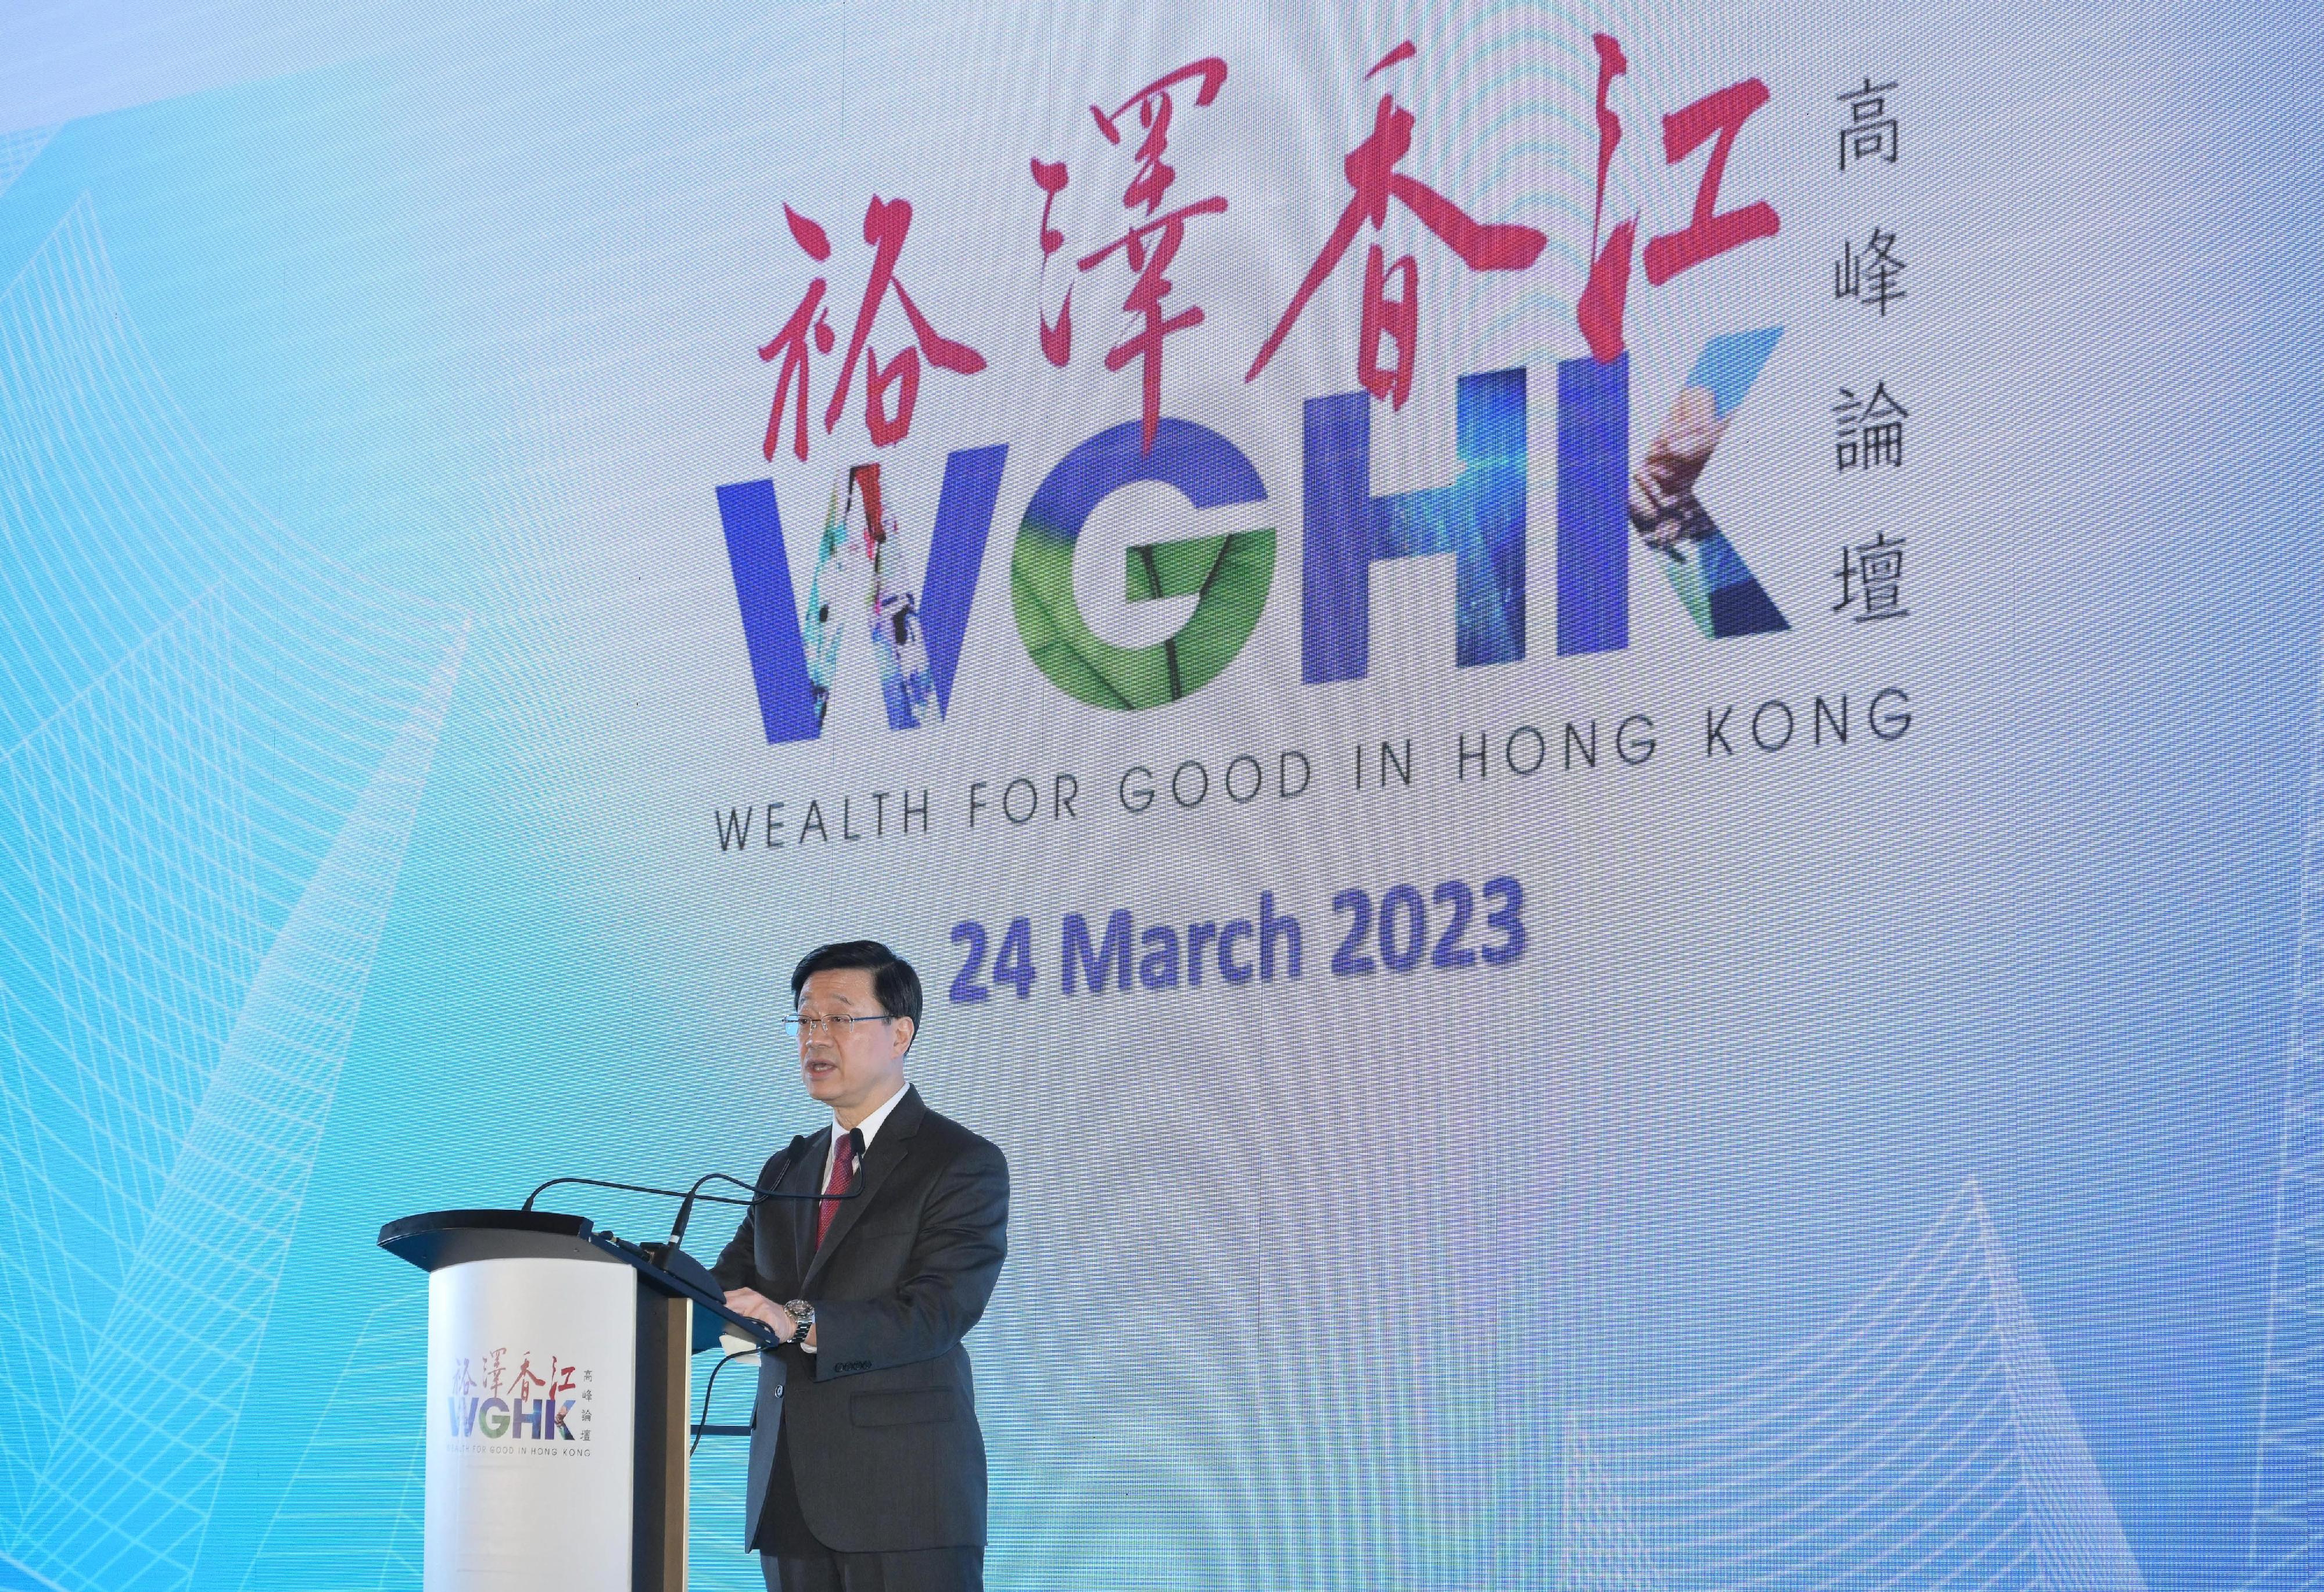 The Chief Executive, Mr John Lee, speaks at the Principal Dinner of the Wealth for Good in Hong Kong Summit today (March 24).